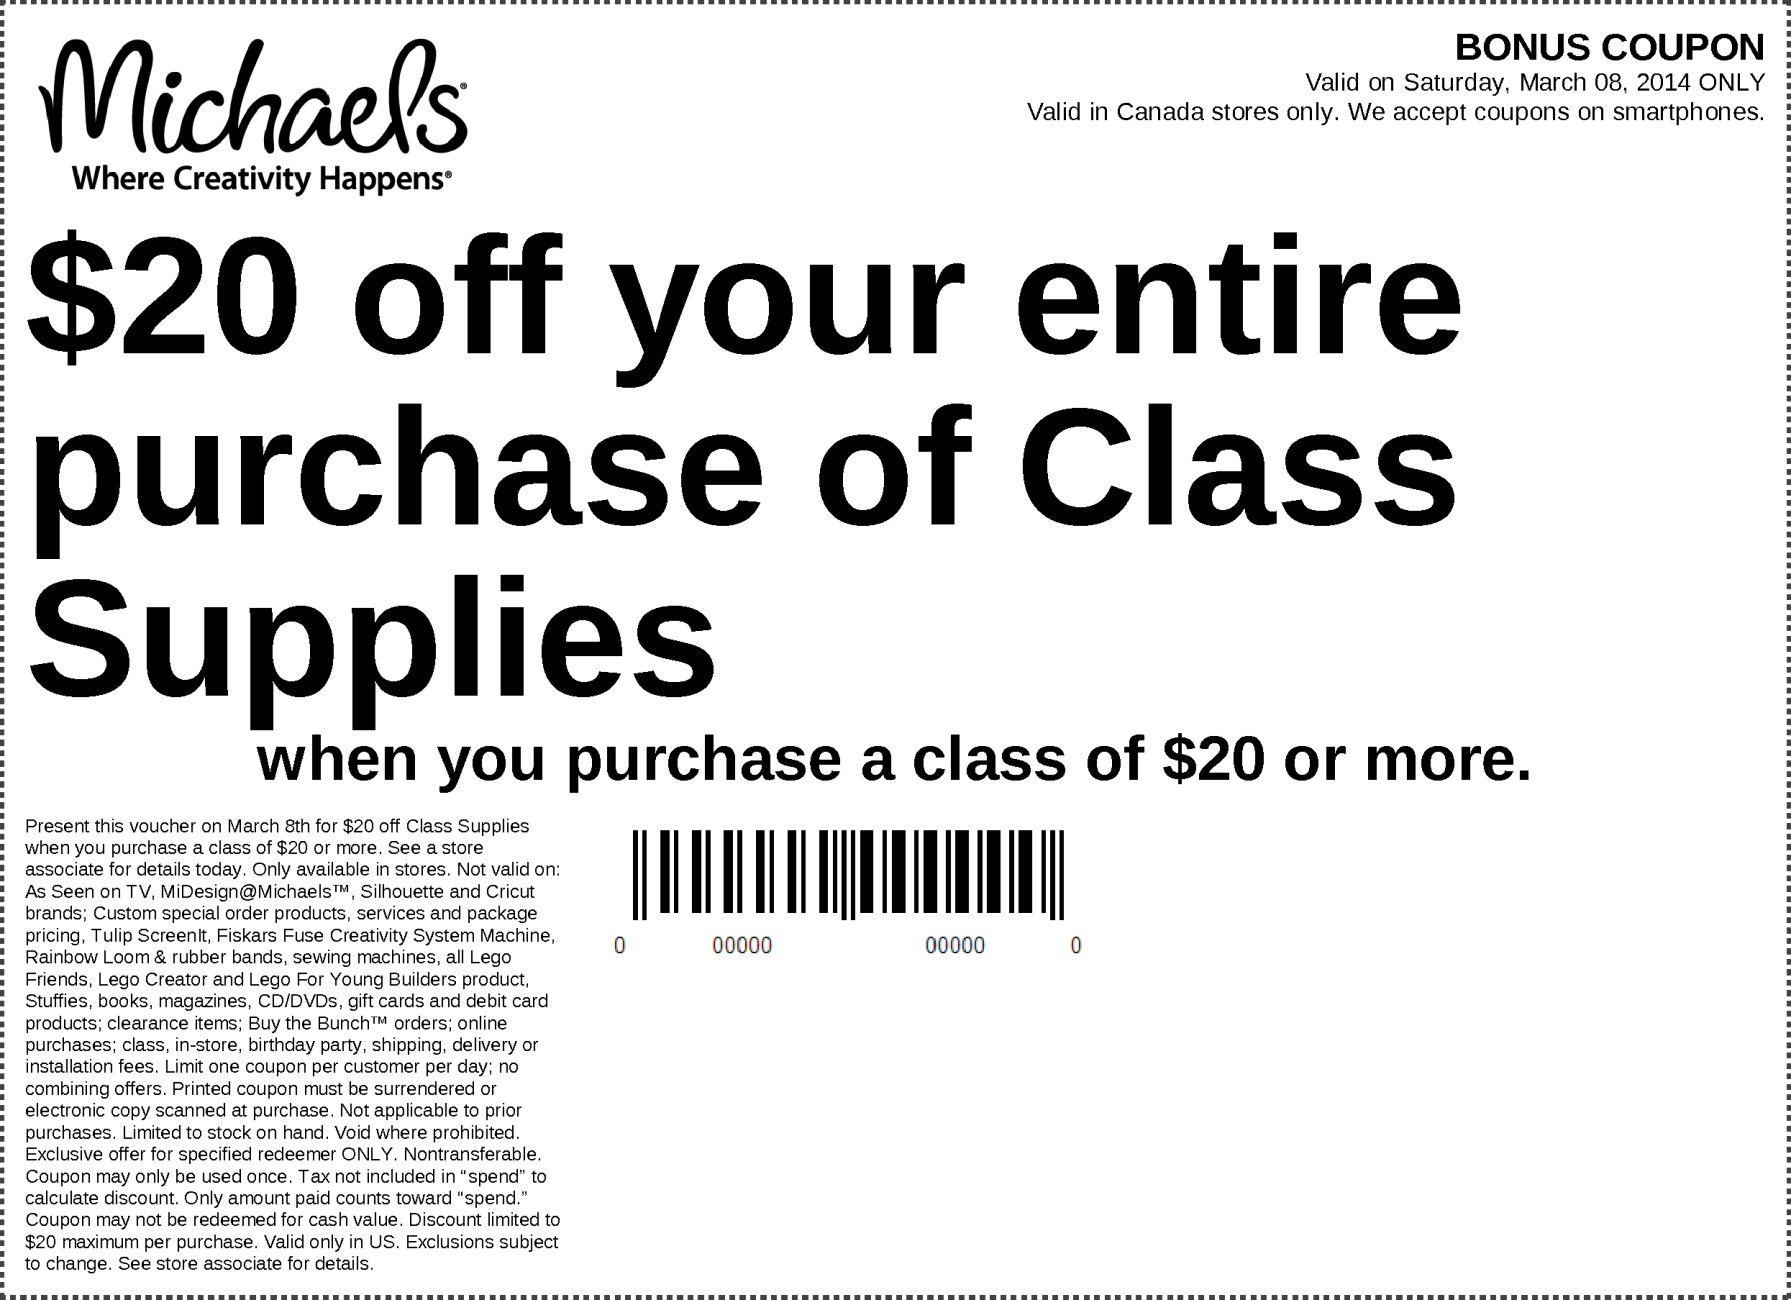 *HOT* Michael s Canada Printable Coupon: Save $20 Off Your Purchase of